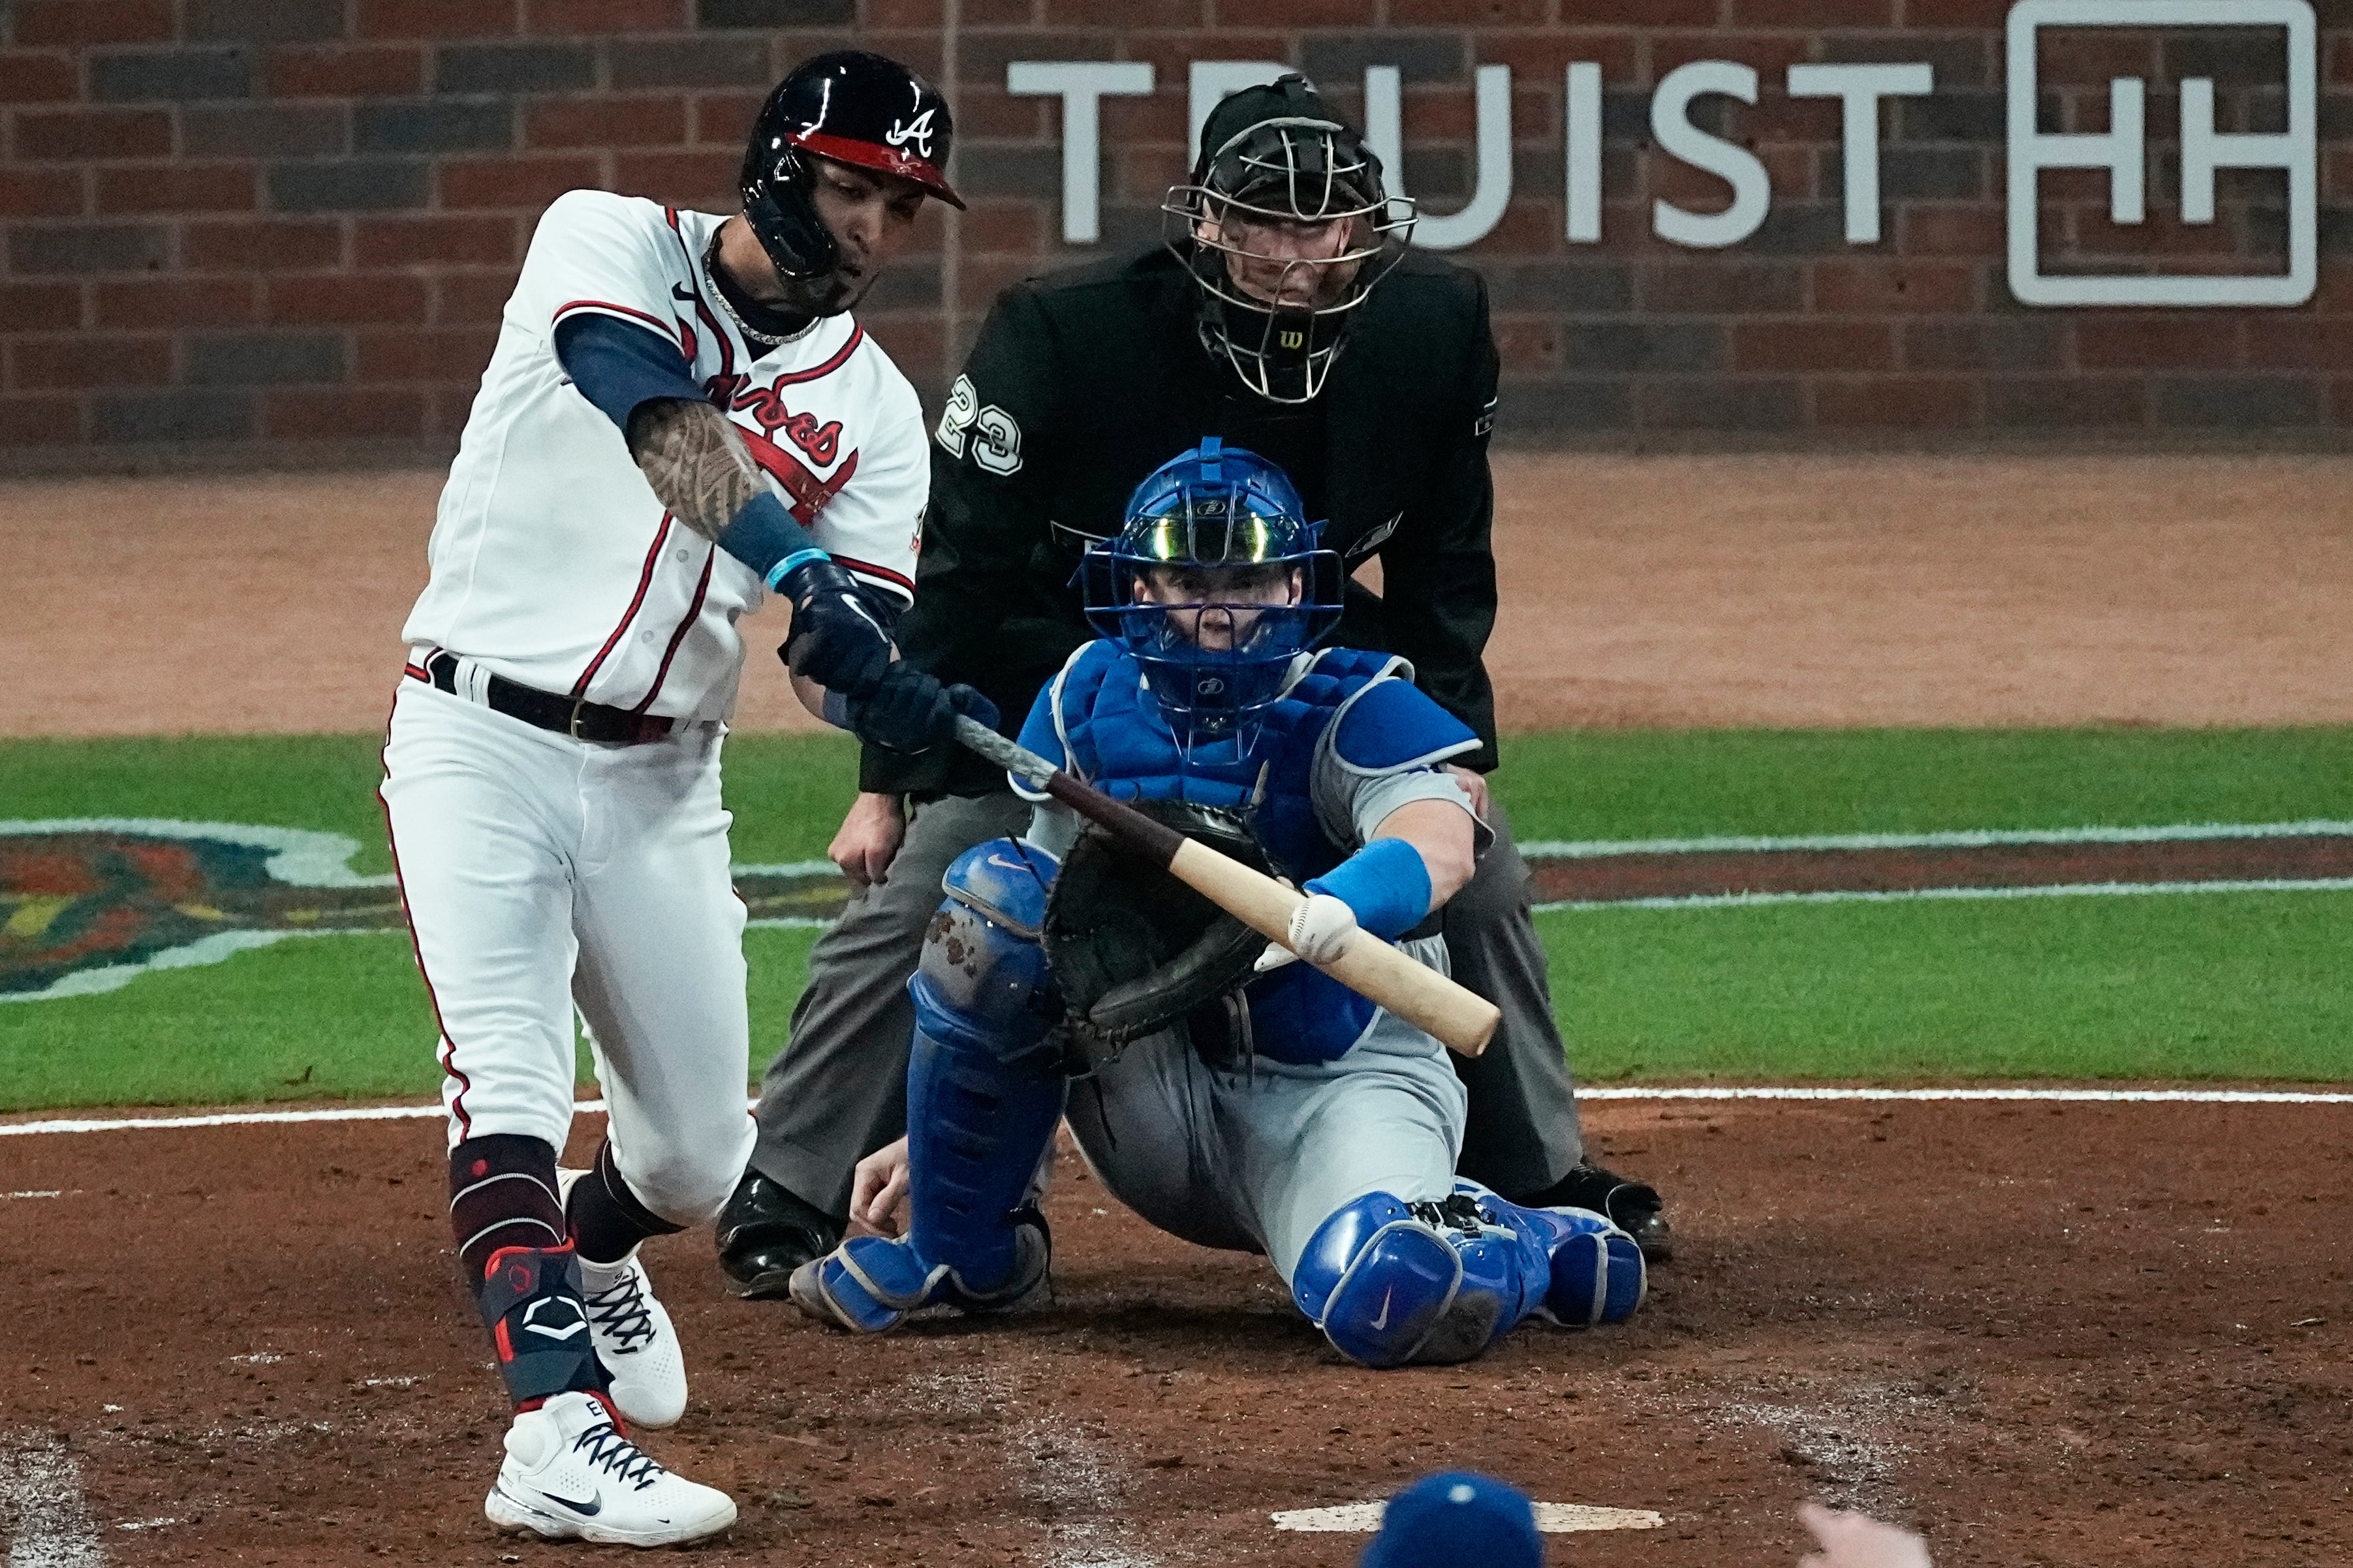 Braves on Cusp of Championship After Game 4 Win - The New York Times